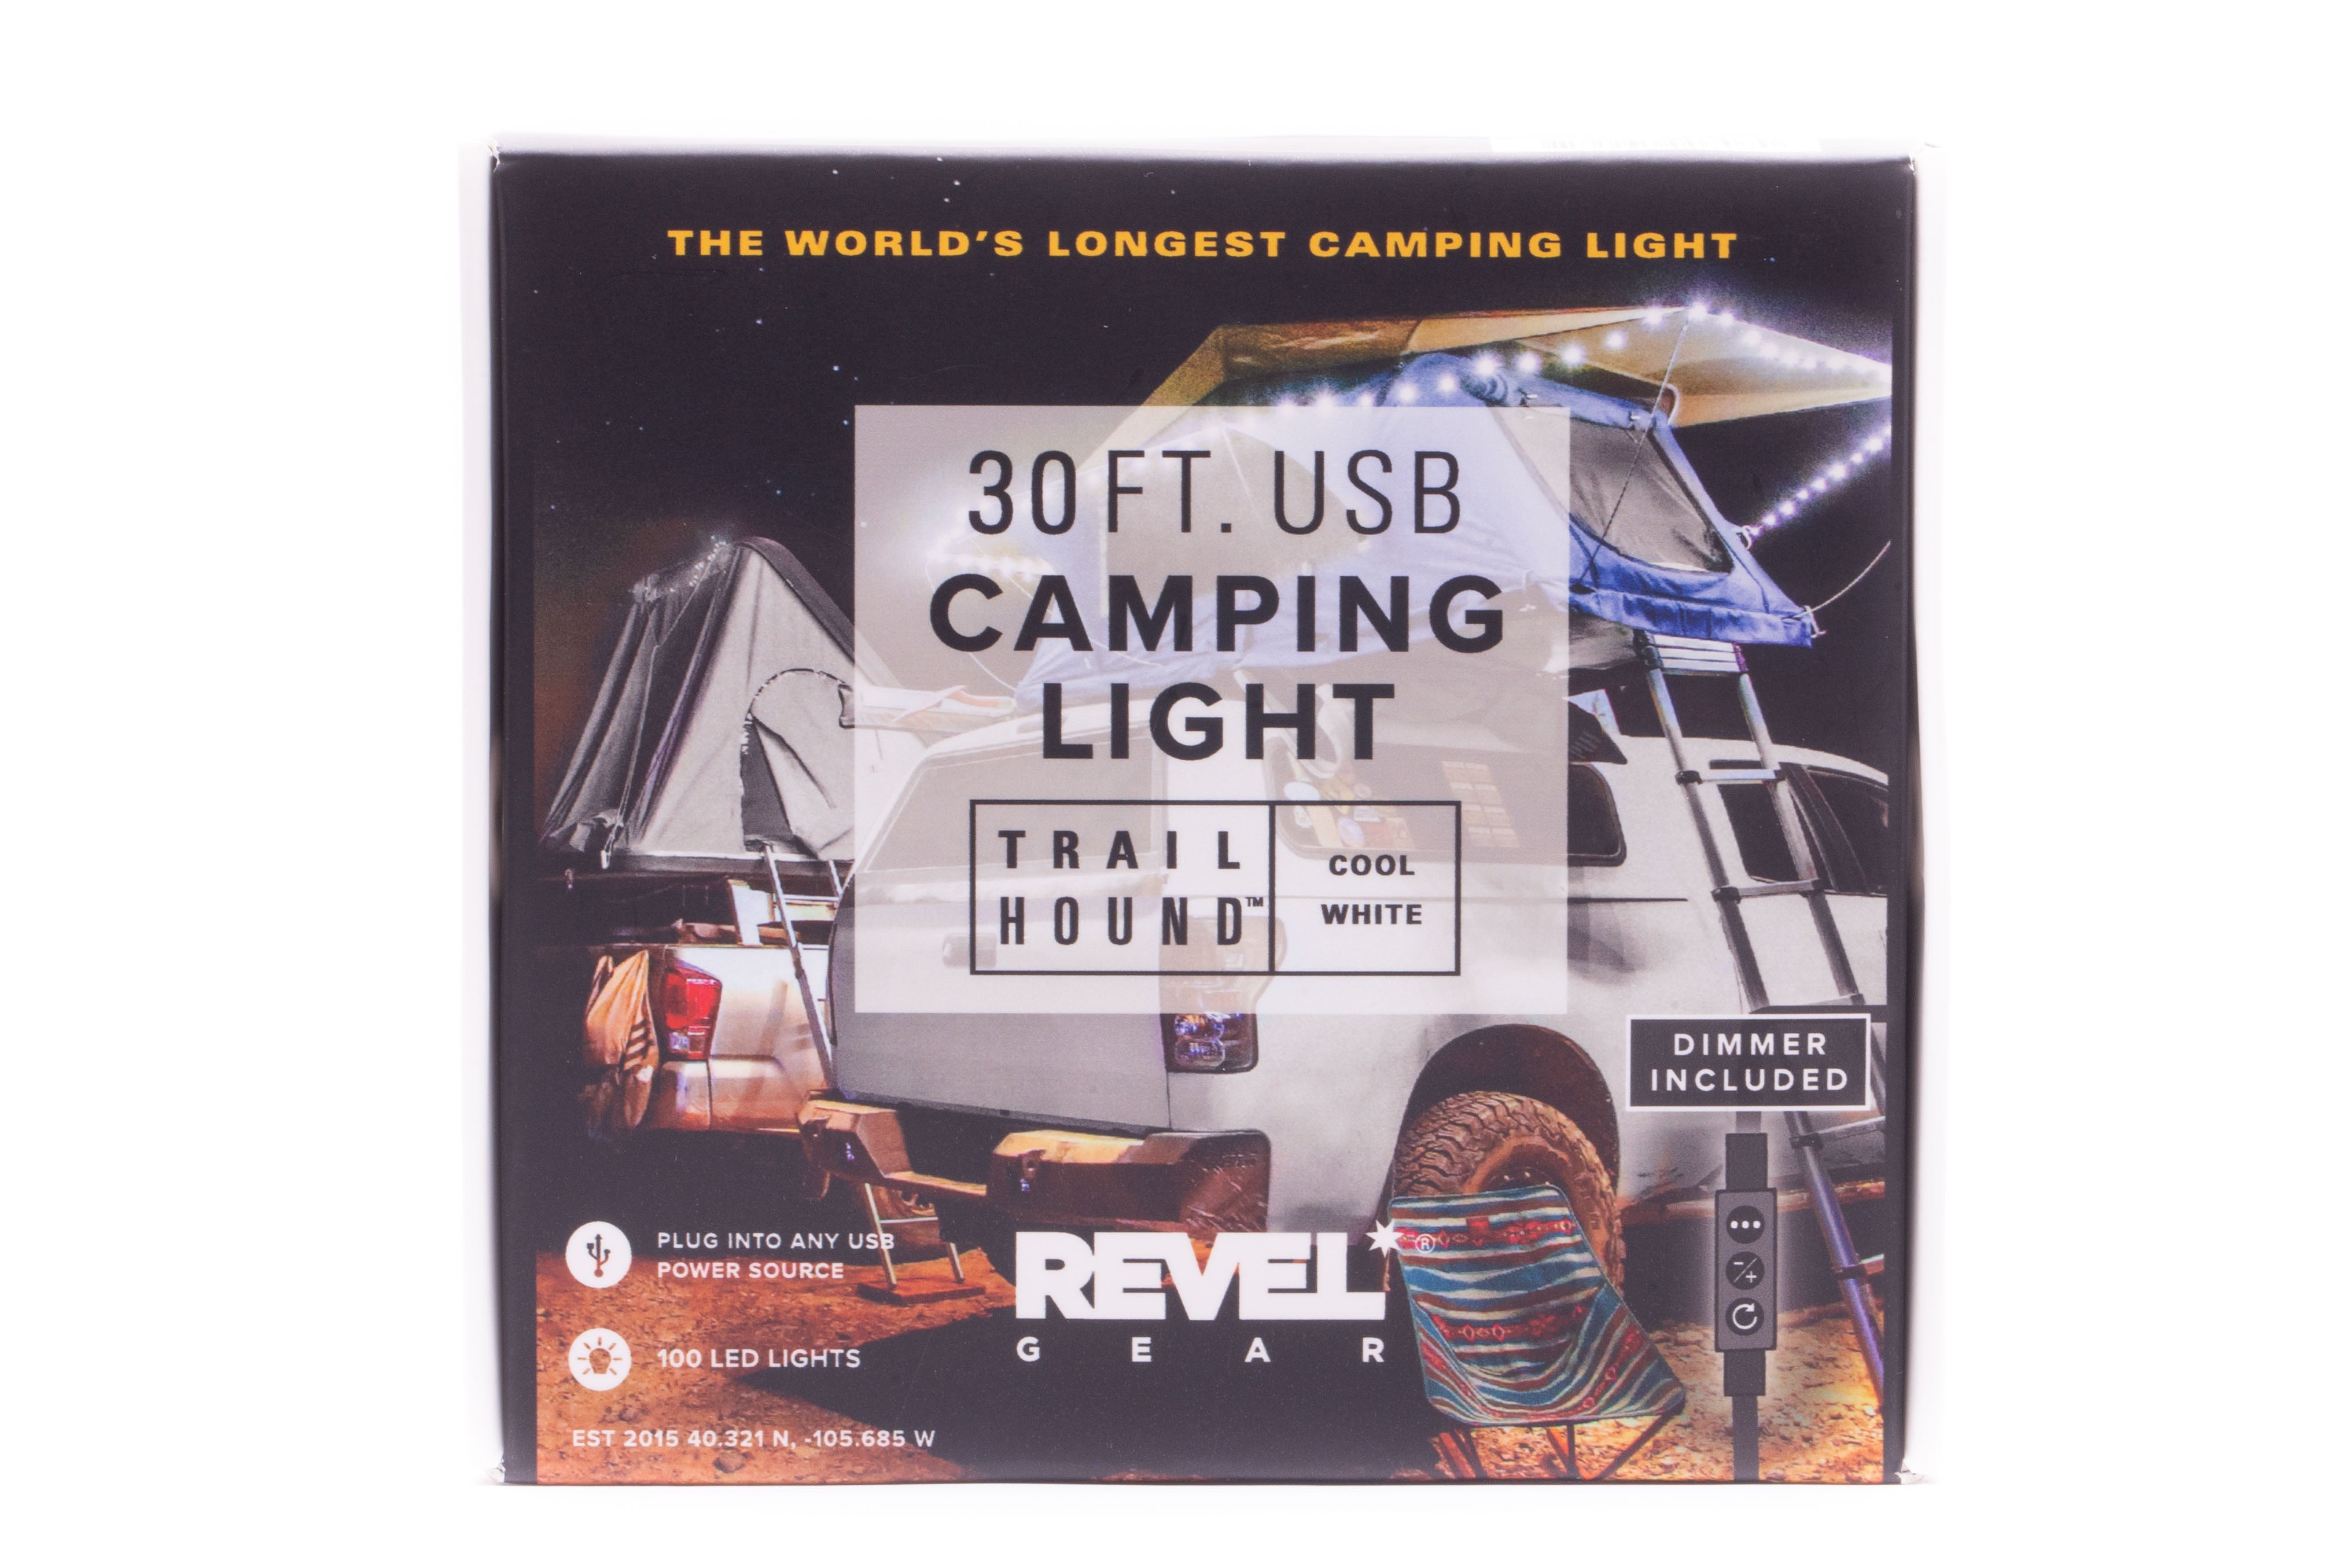 Revel Gear - Trail Hound 30 ft. Camping Light